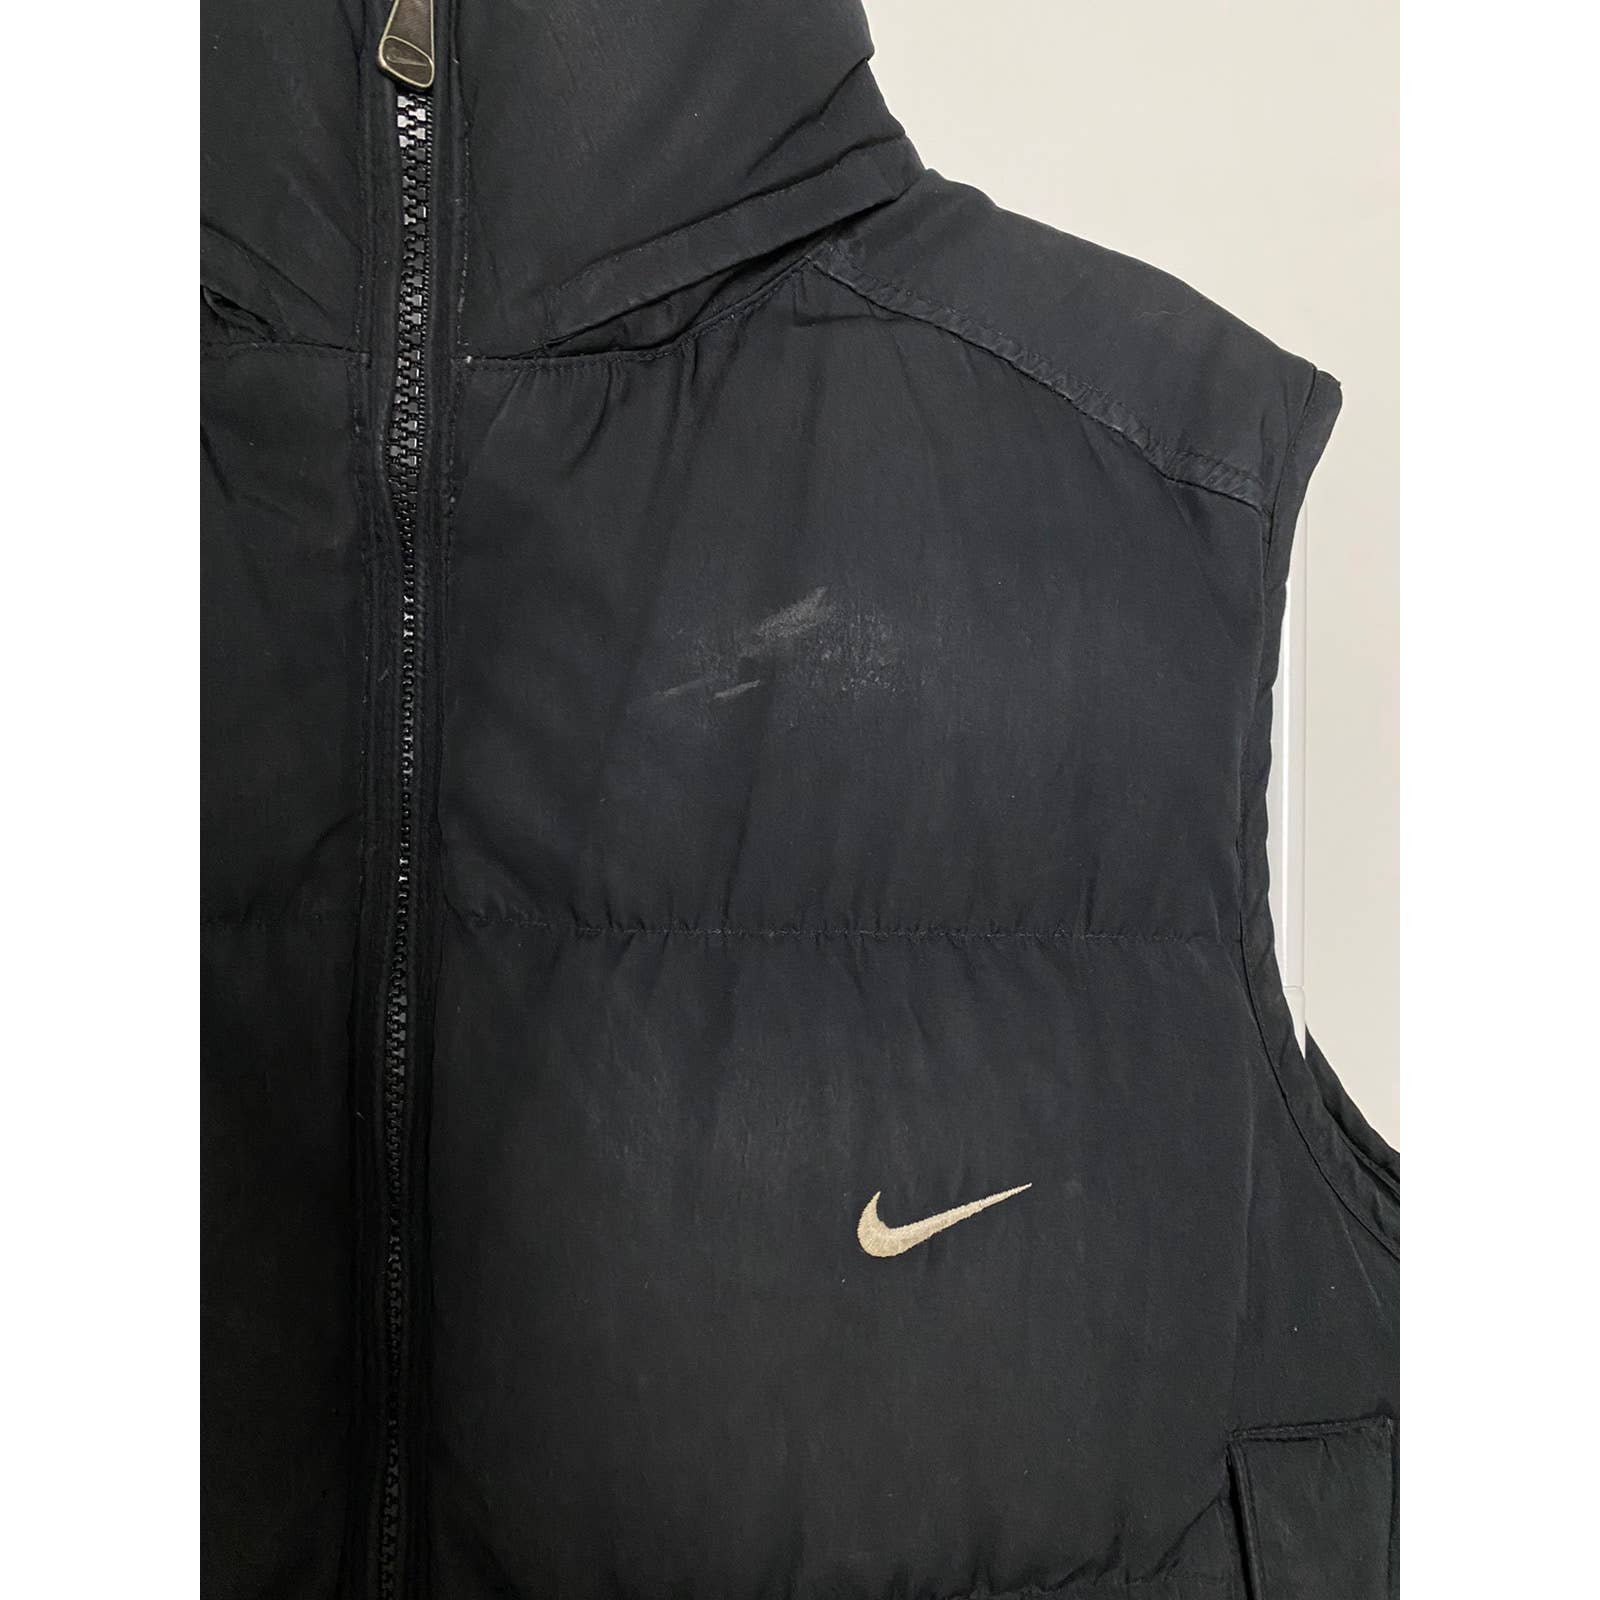 Nike vintage black puffer vest small swoosh 2000s – Refitted